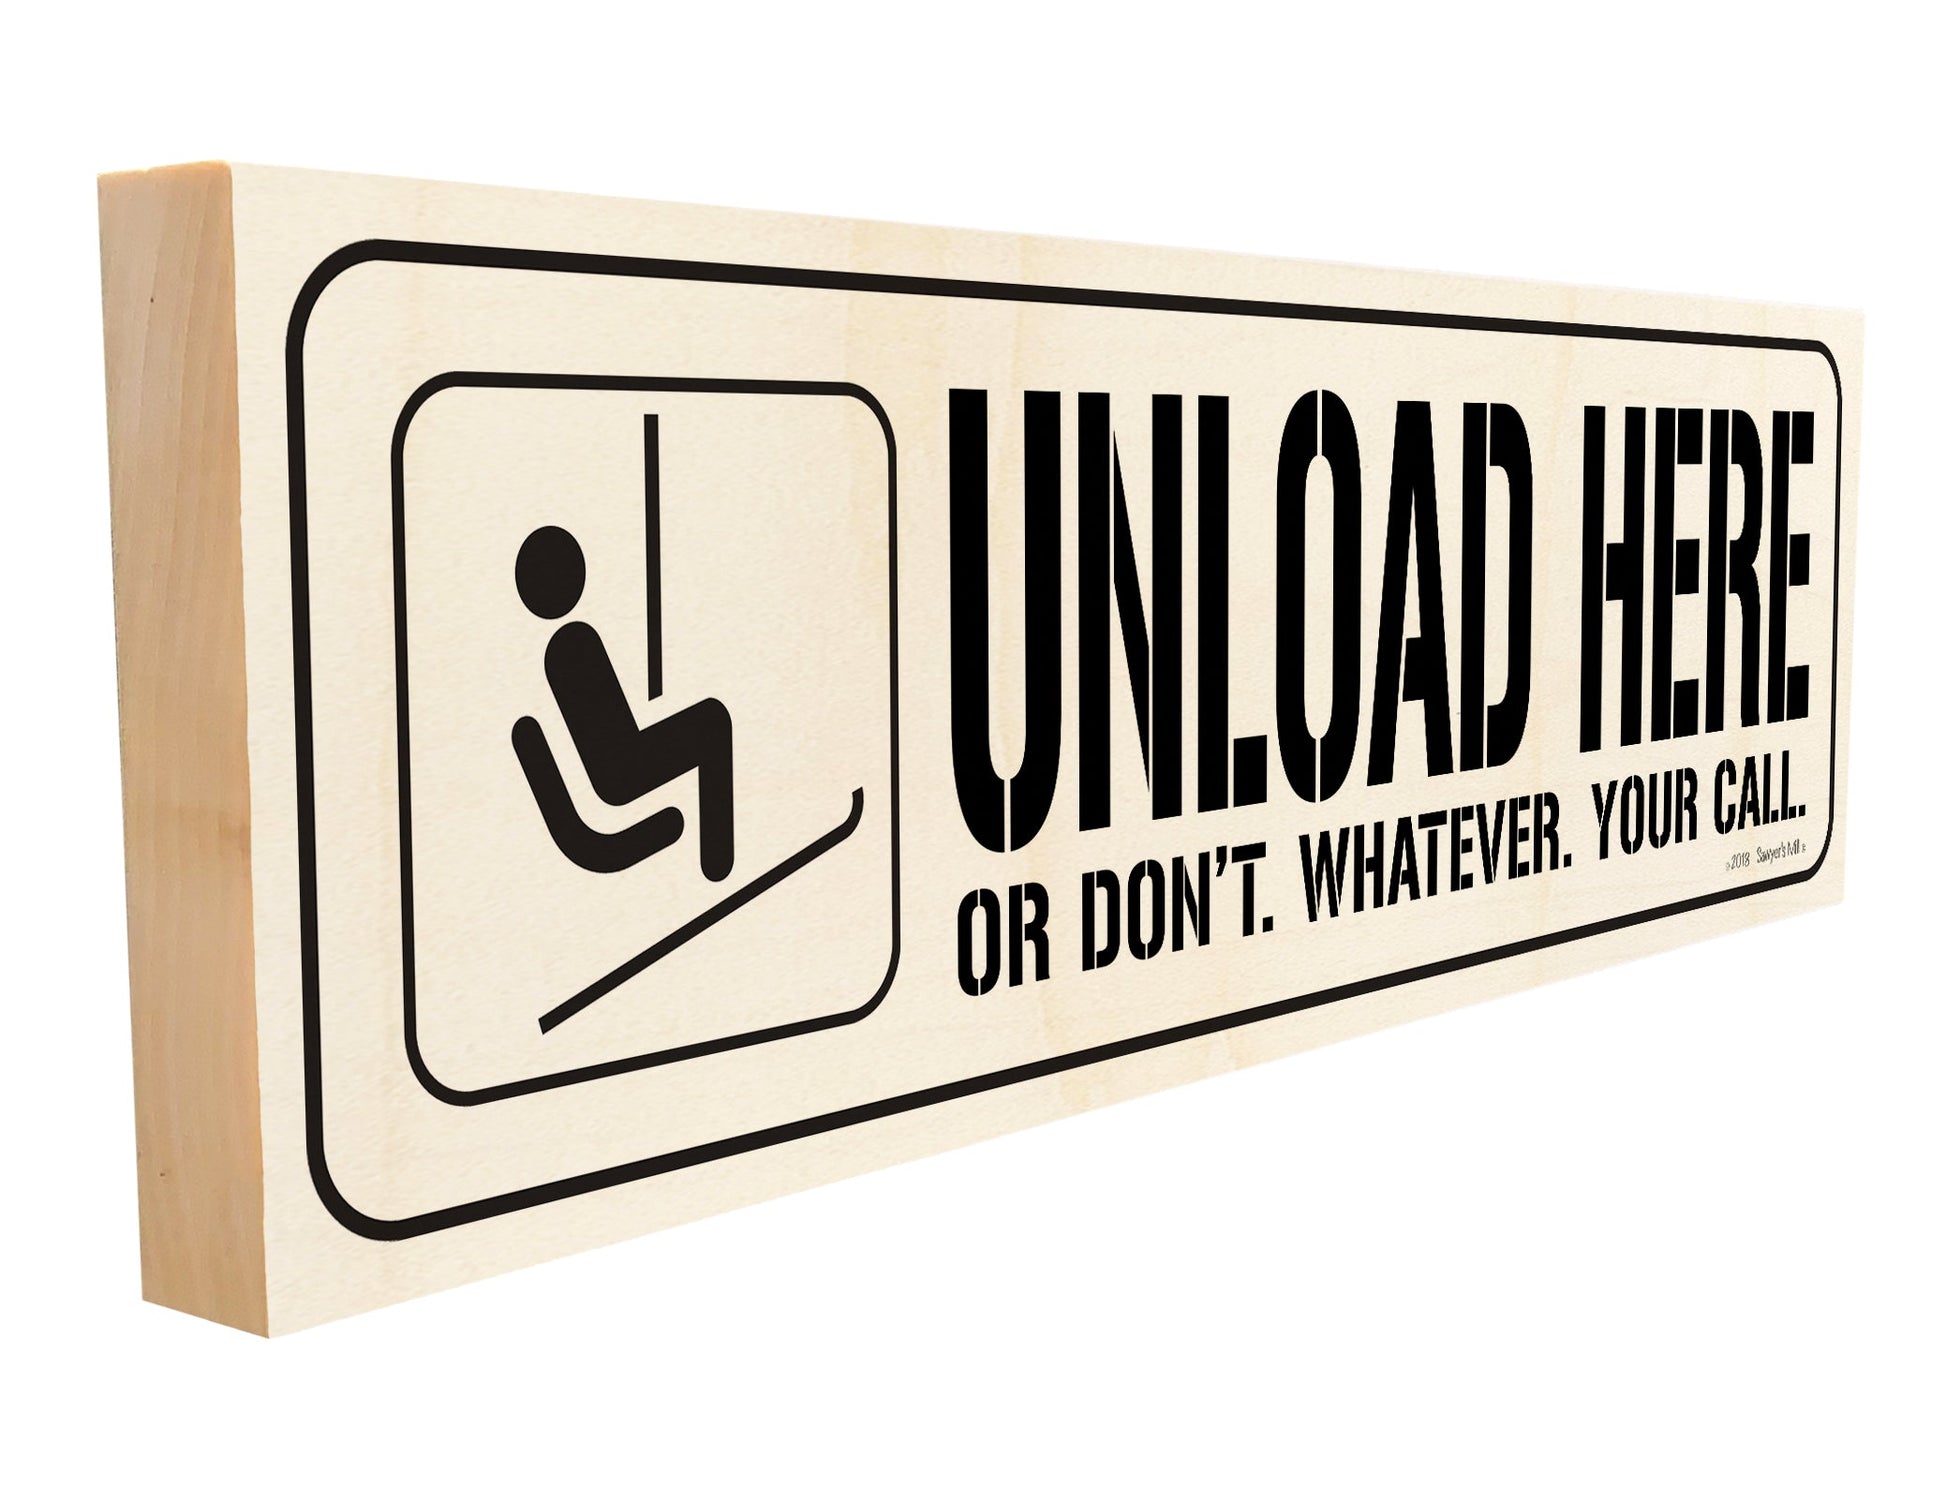 Unload Here or Don't. Whatever. Your Call.